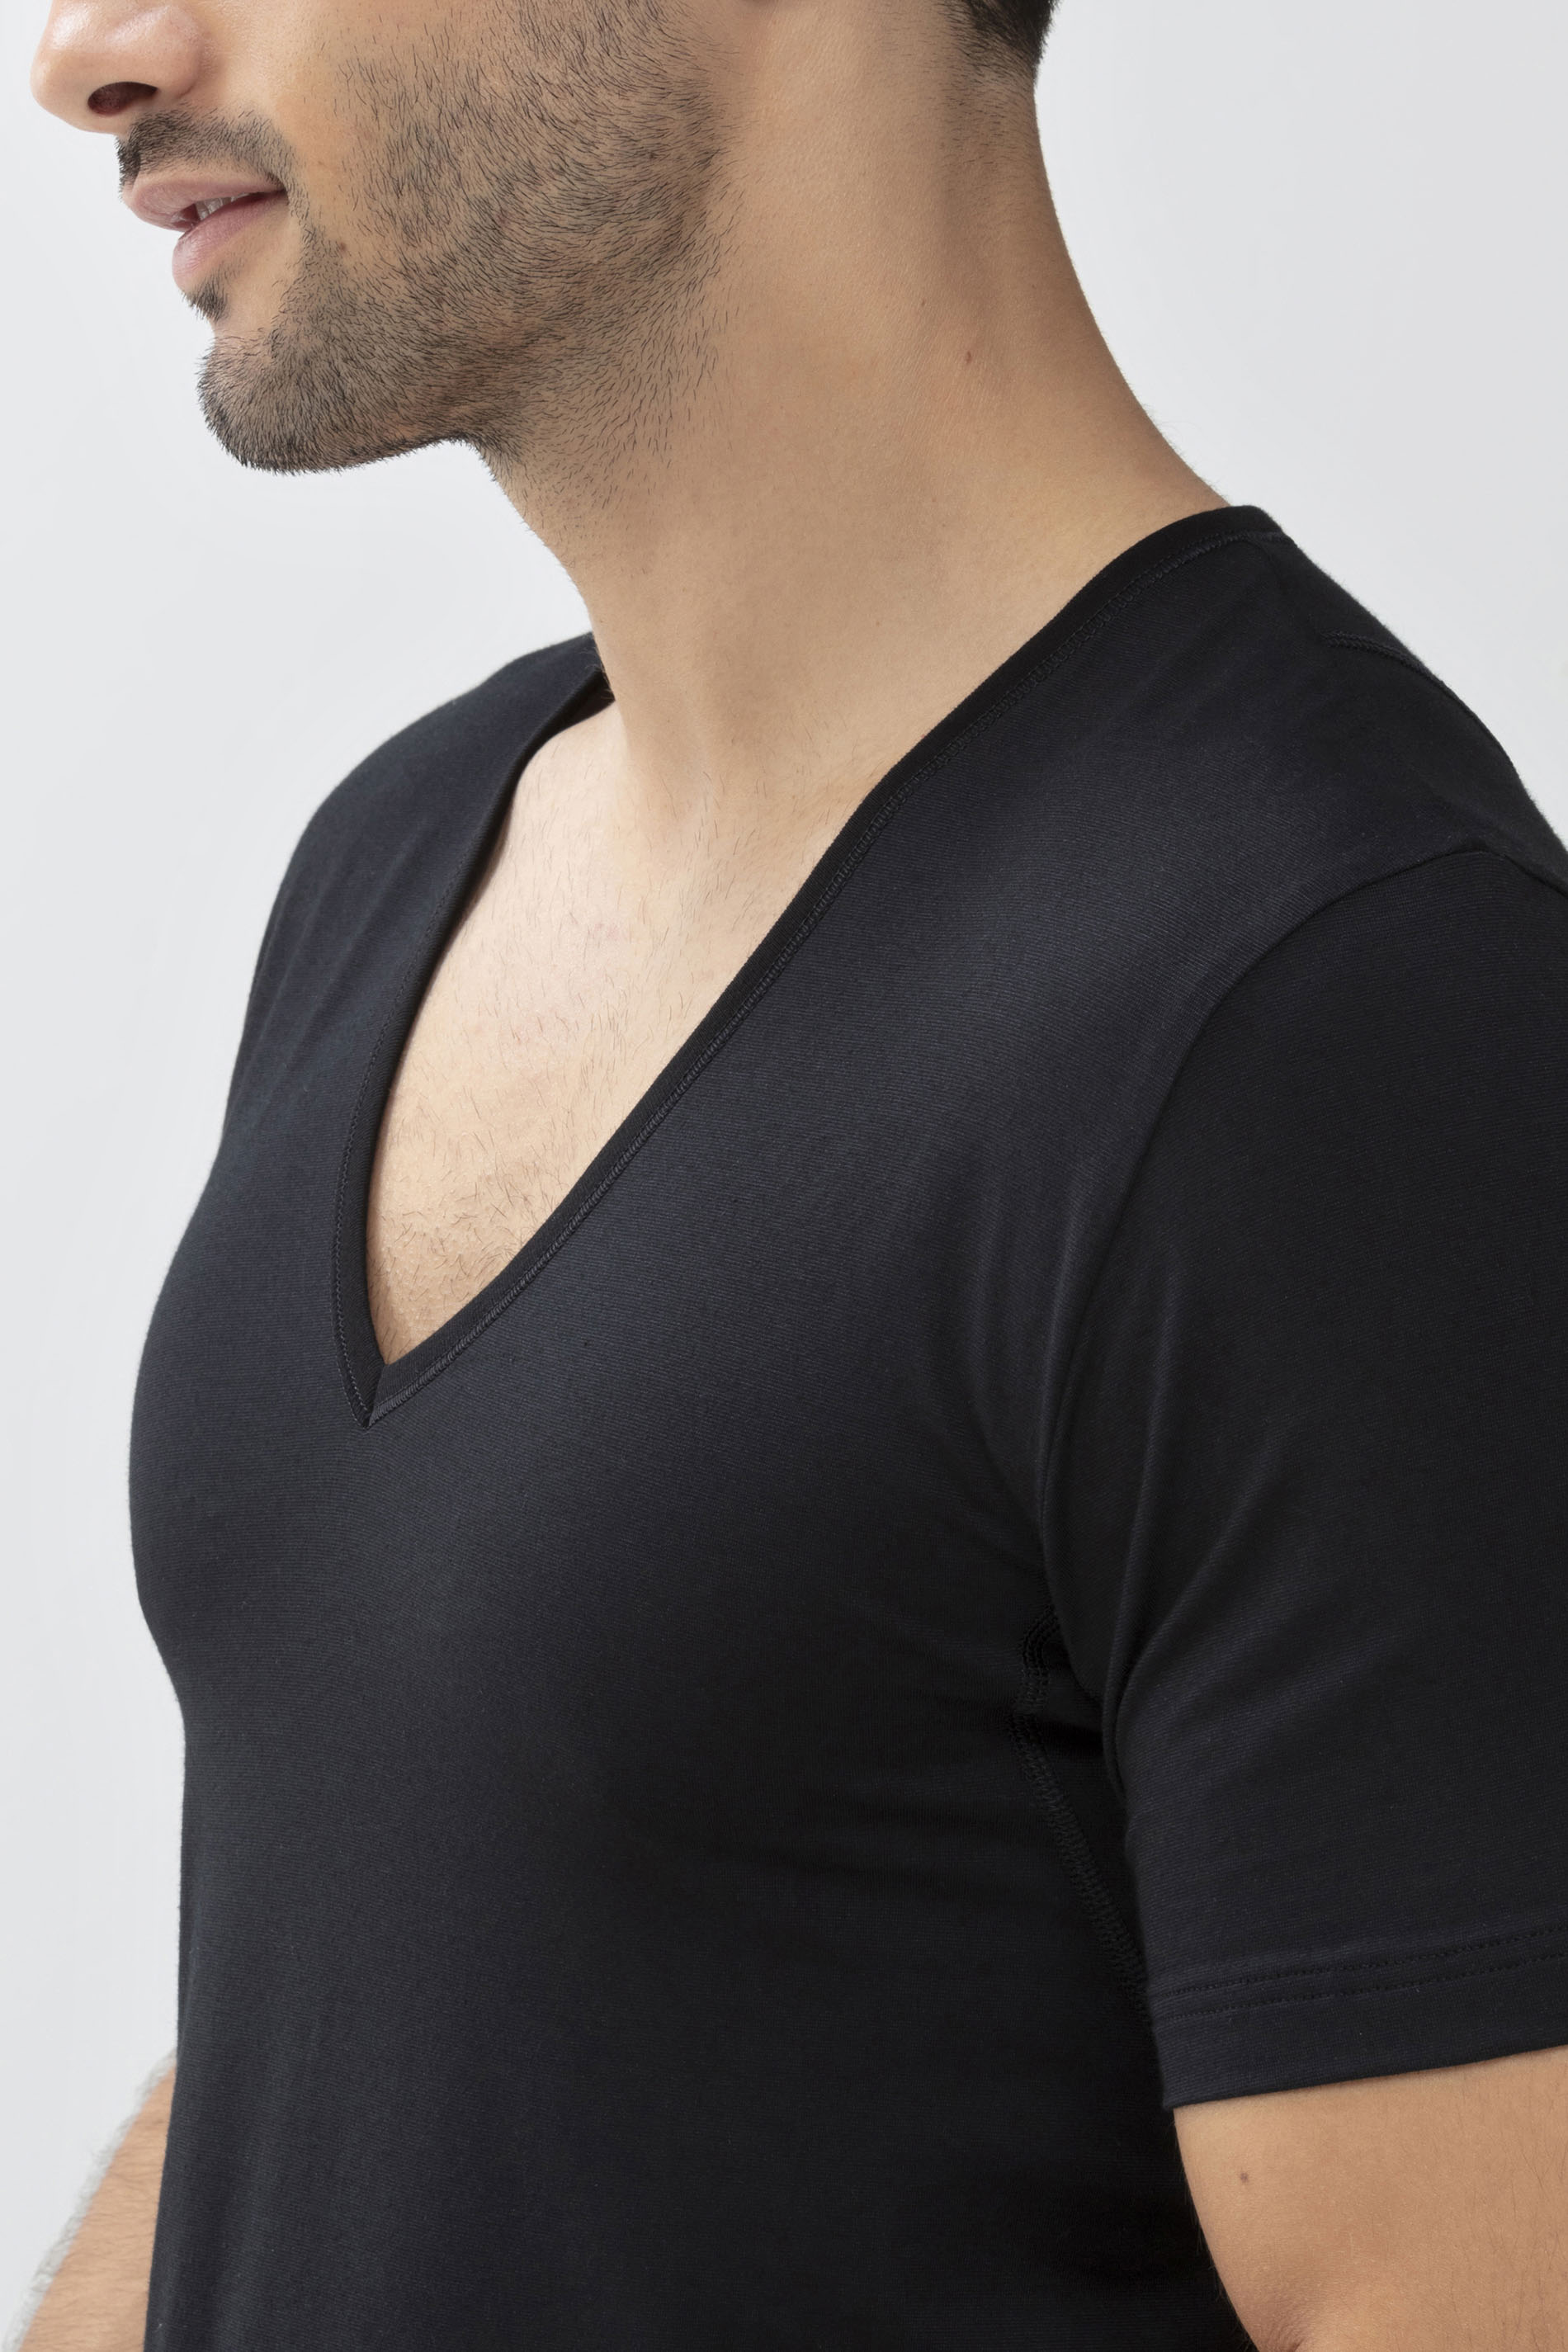 The undershirt - v neck Black Serie Dry Cotton Functional  Detail View 01 | mey®